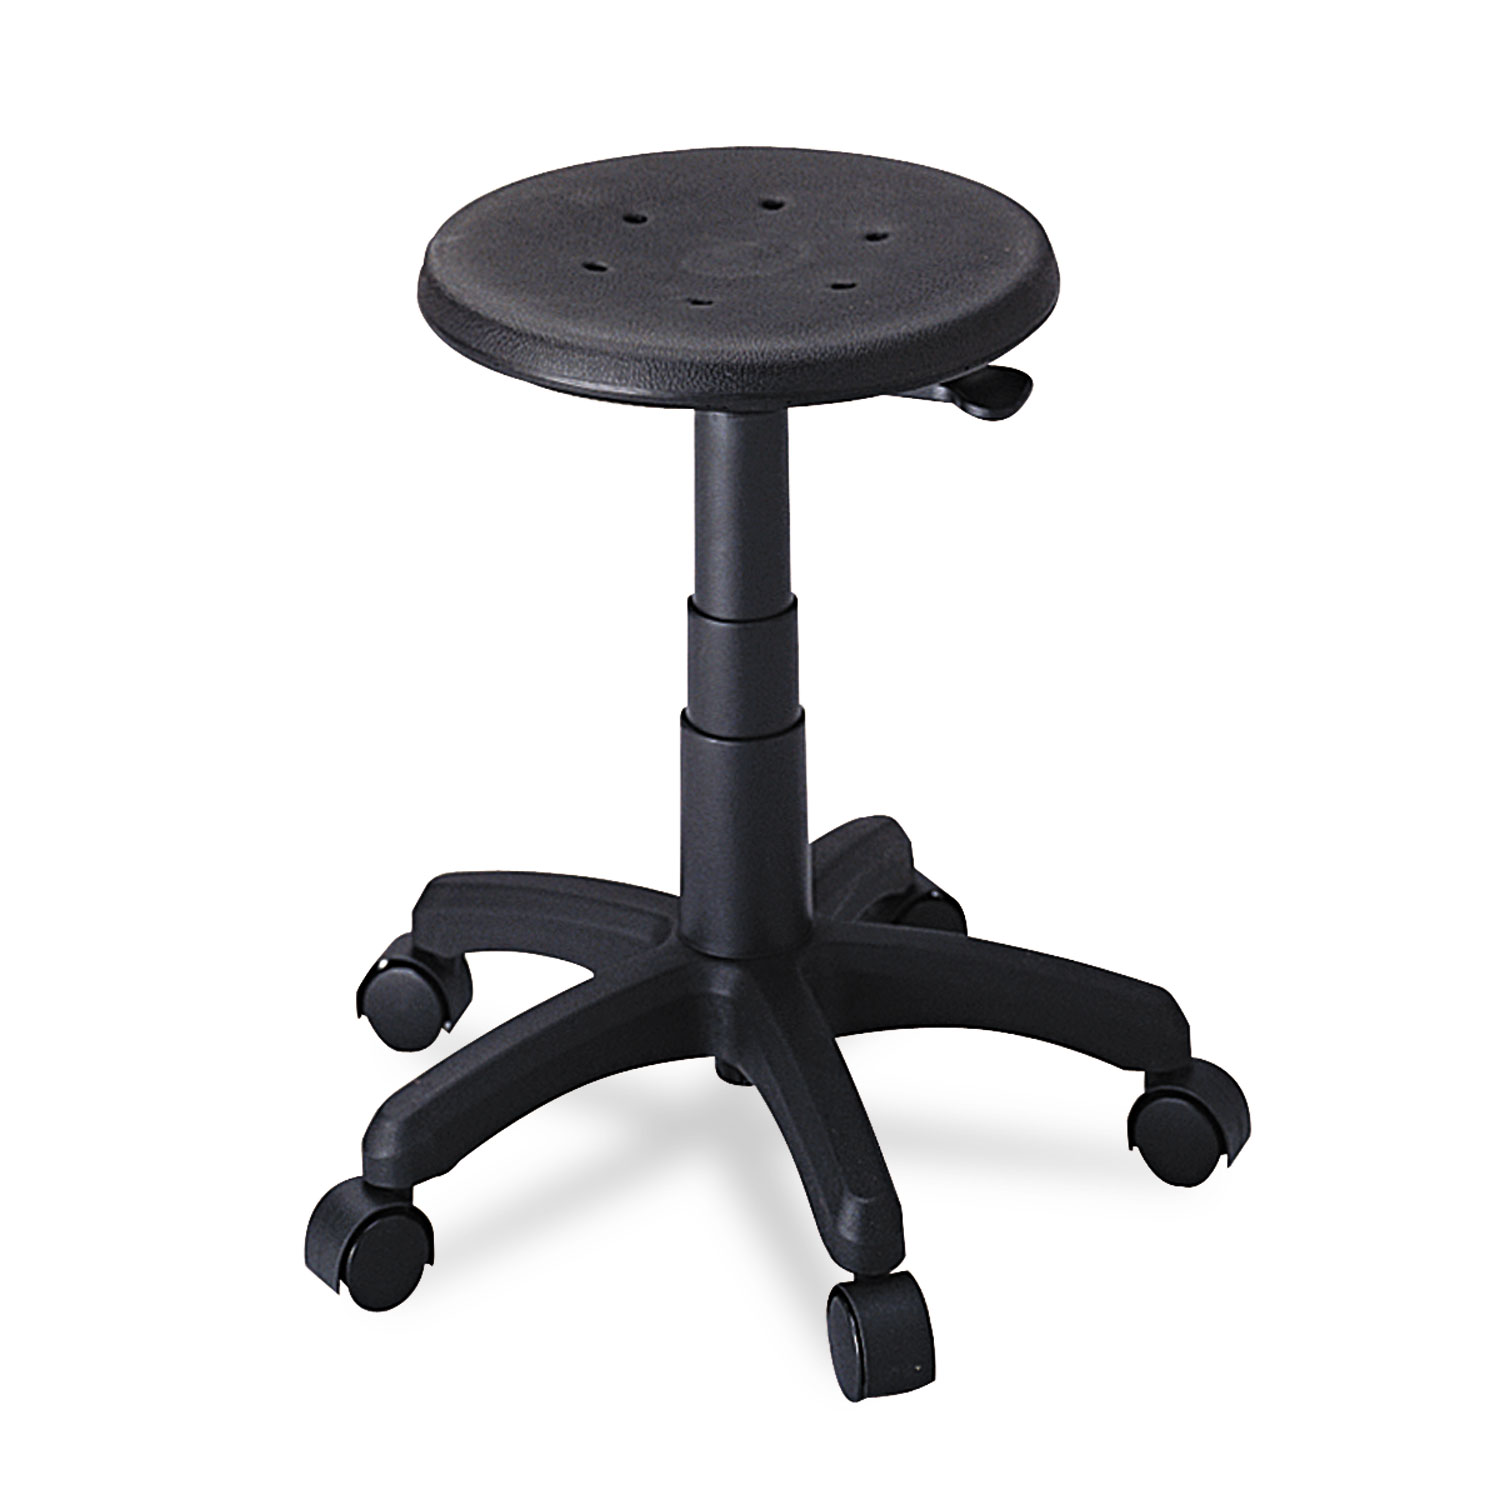  Safco 5100 Office Stool, 21 Seat Height, Supports up to 250 lbs., Black Seat, Black Back, Black Base (SAF5100) 